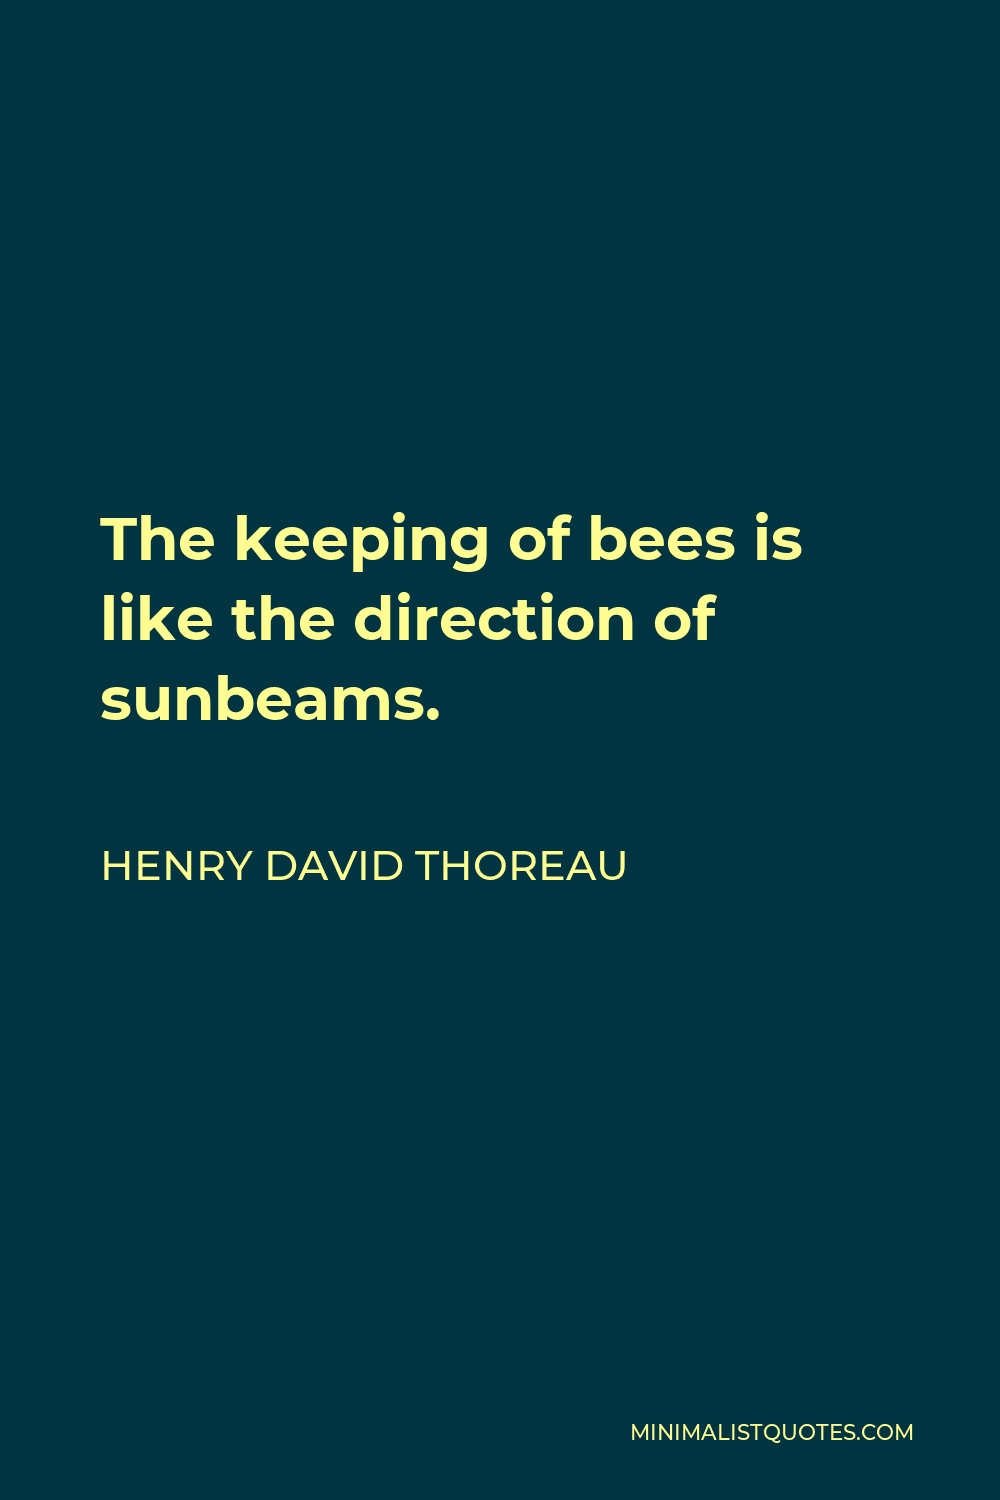 Henry David Thoreau Quote - The keeping of bees is like the direction of sunbeams.